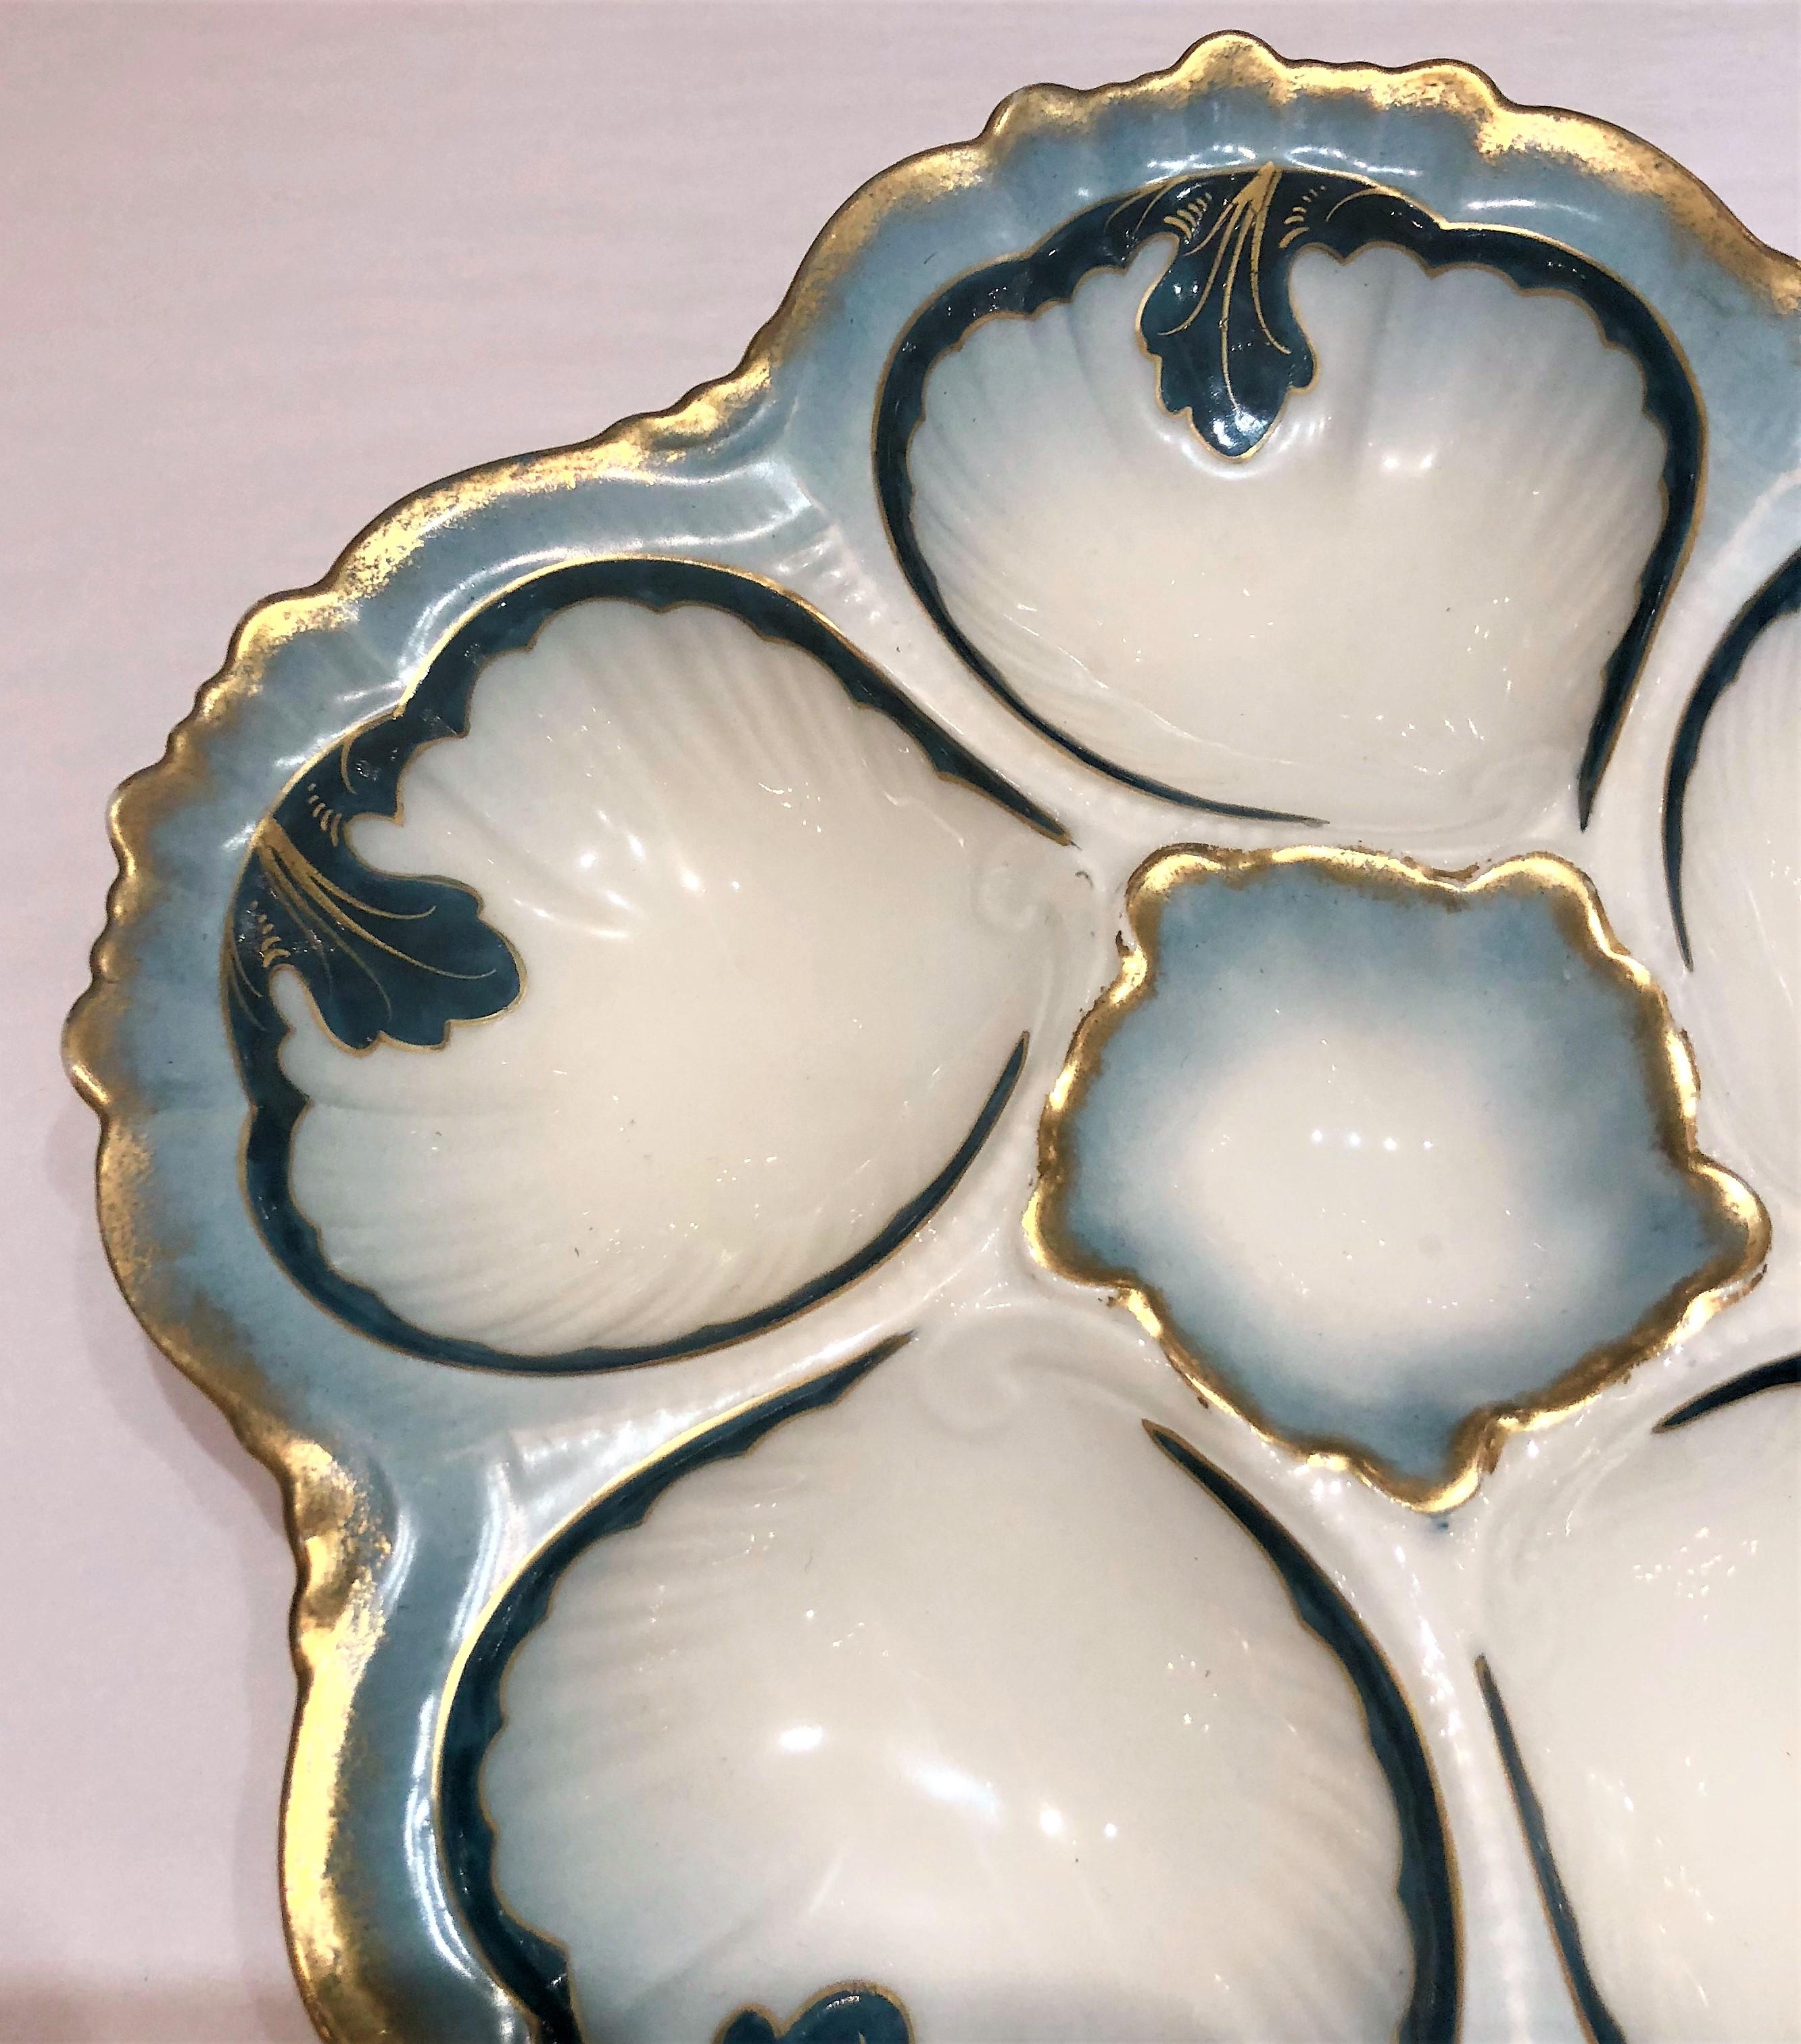 Antique French hand-painted oyster plate made for Tressemanes & Vogt, circa 1900.